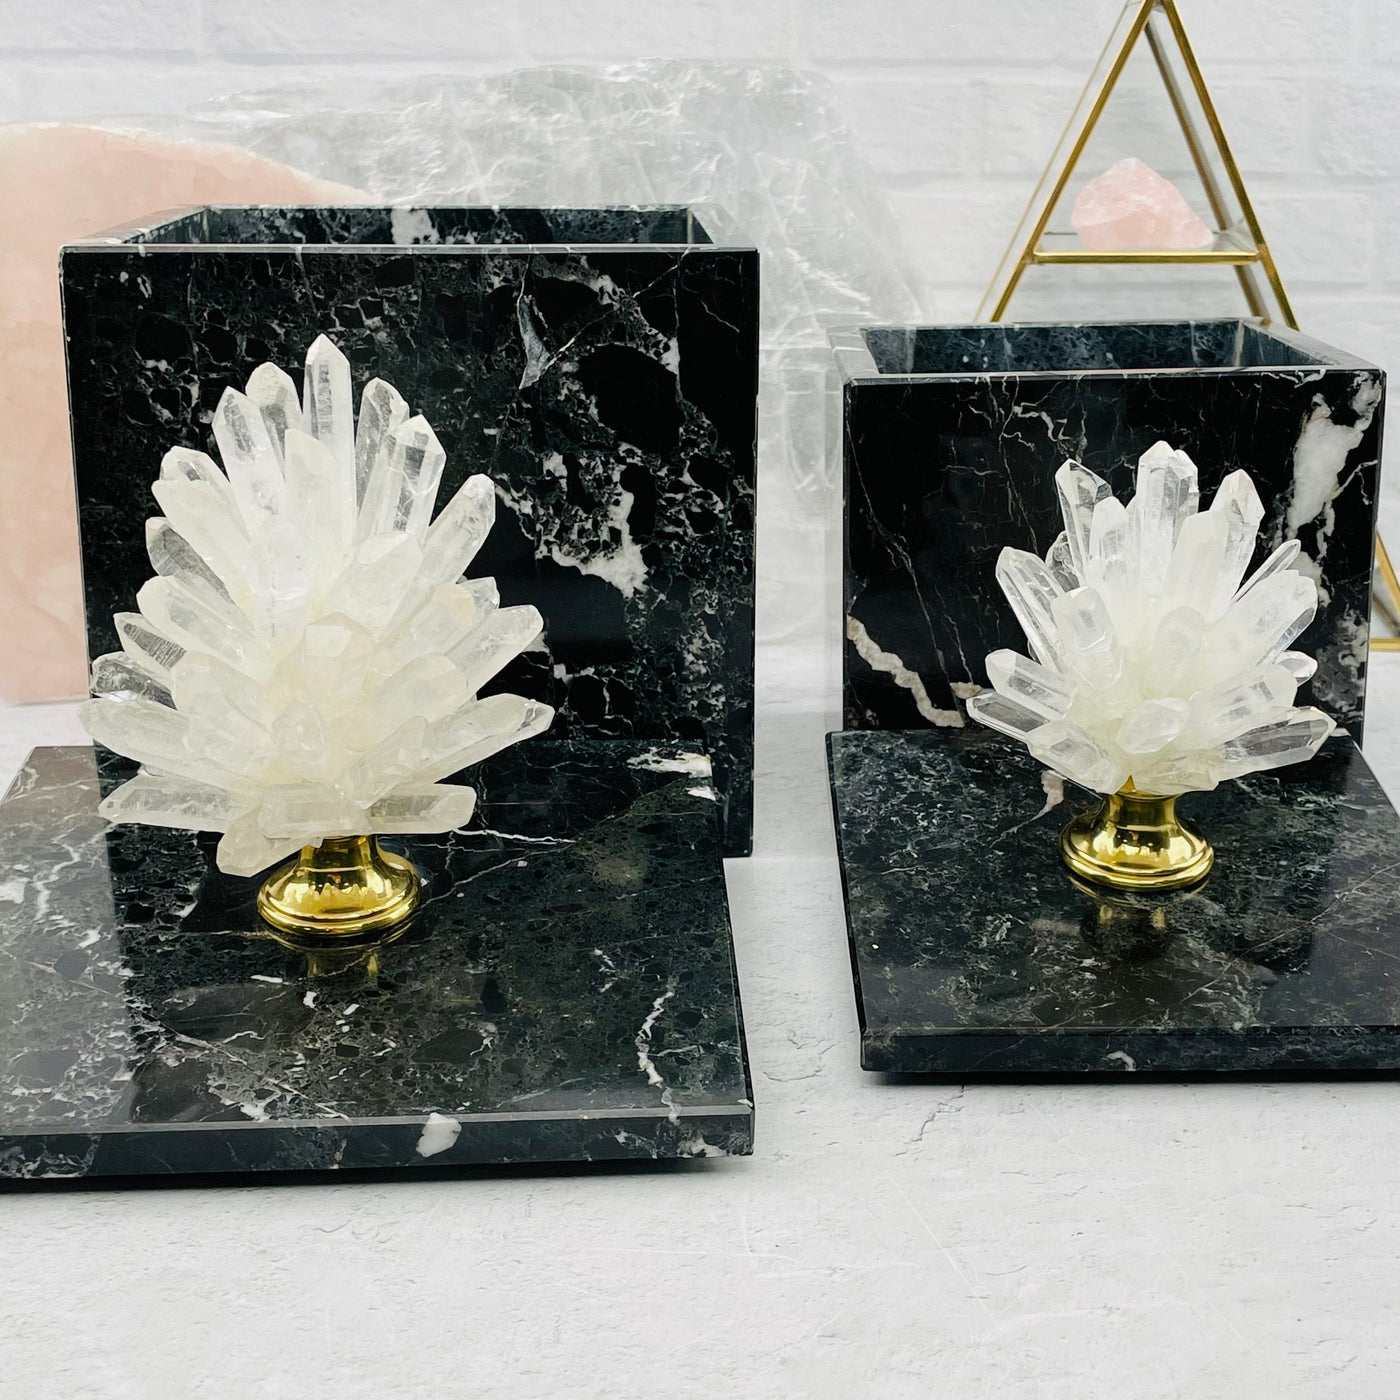  crystal point pinecone on marble box with lids off and decorations in the background